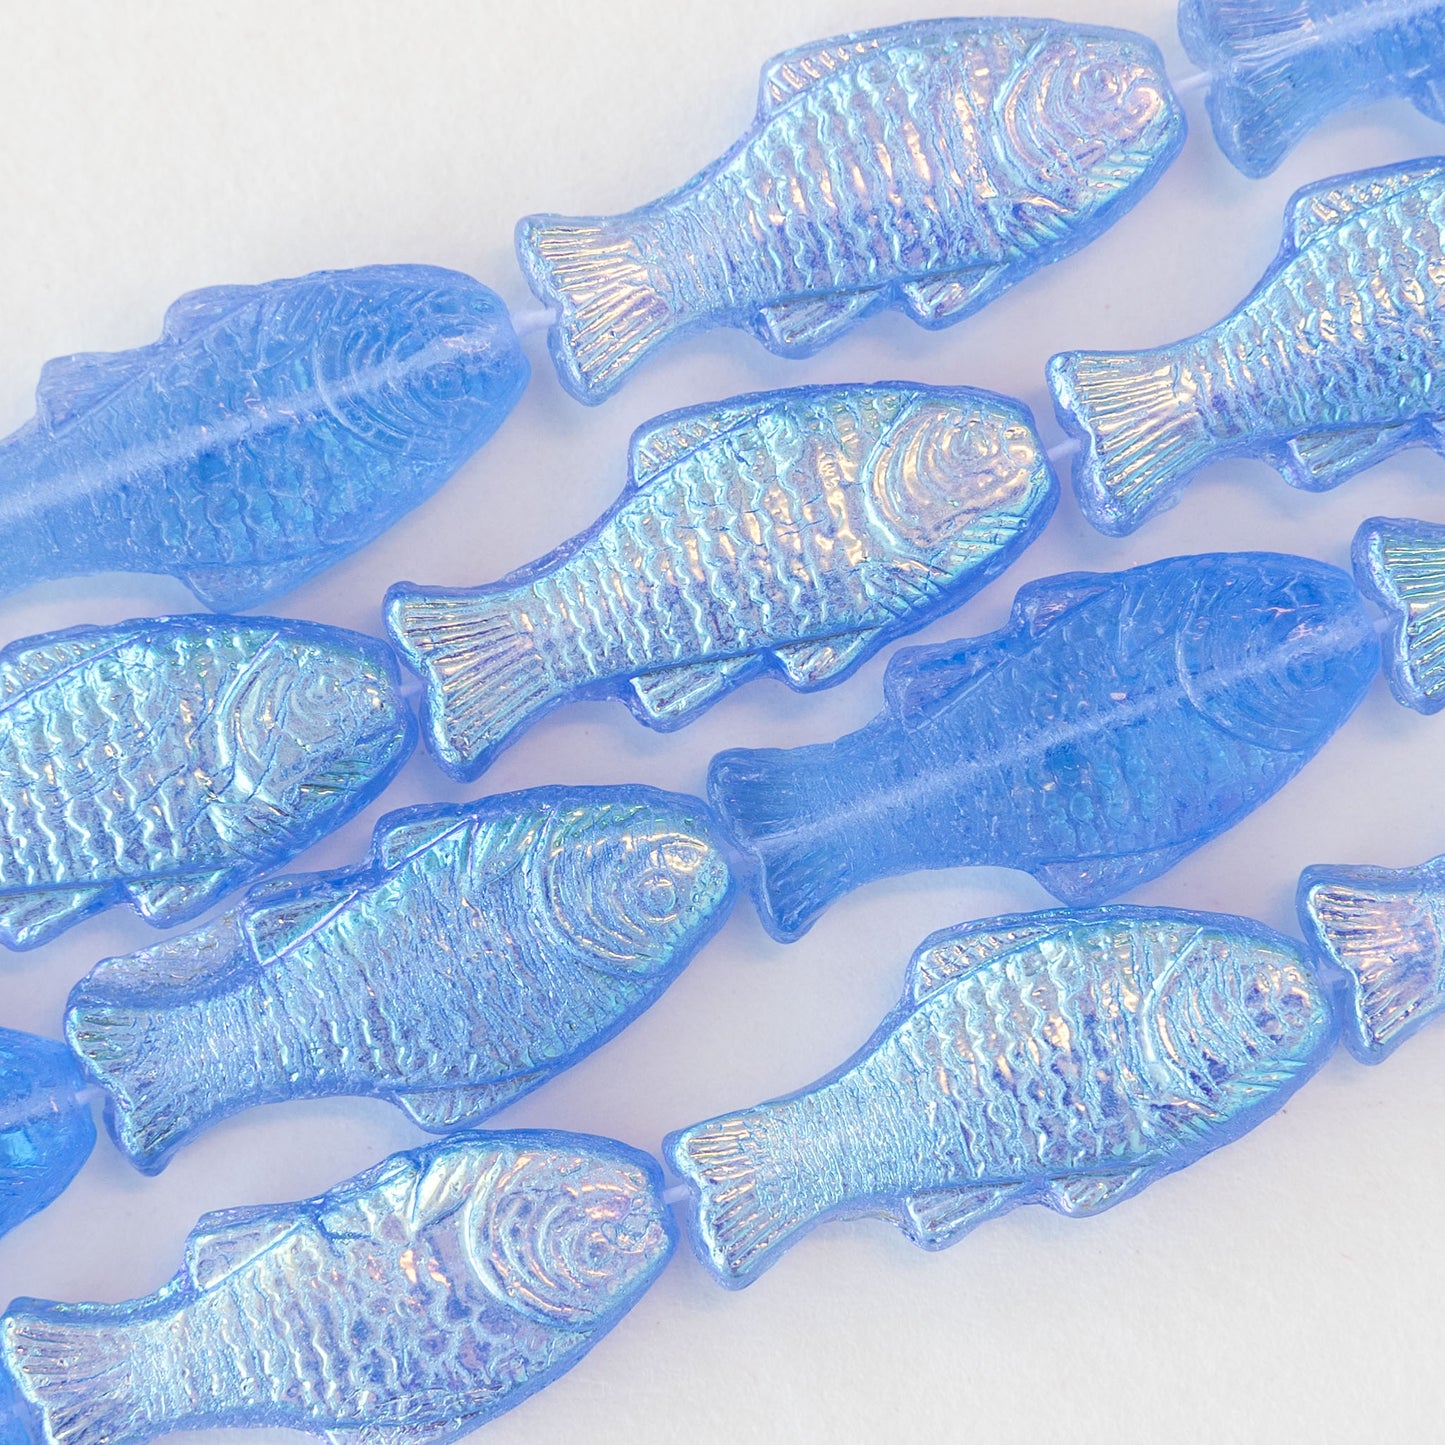 Glass Fish Beads - Light Blue AB Luster - 6 or 12